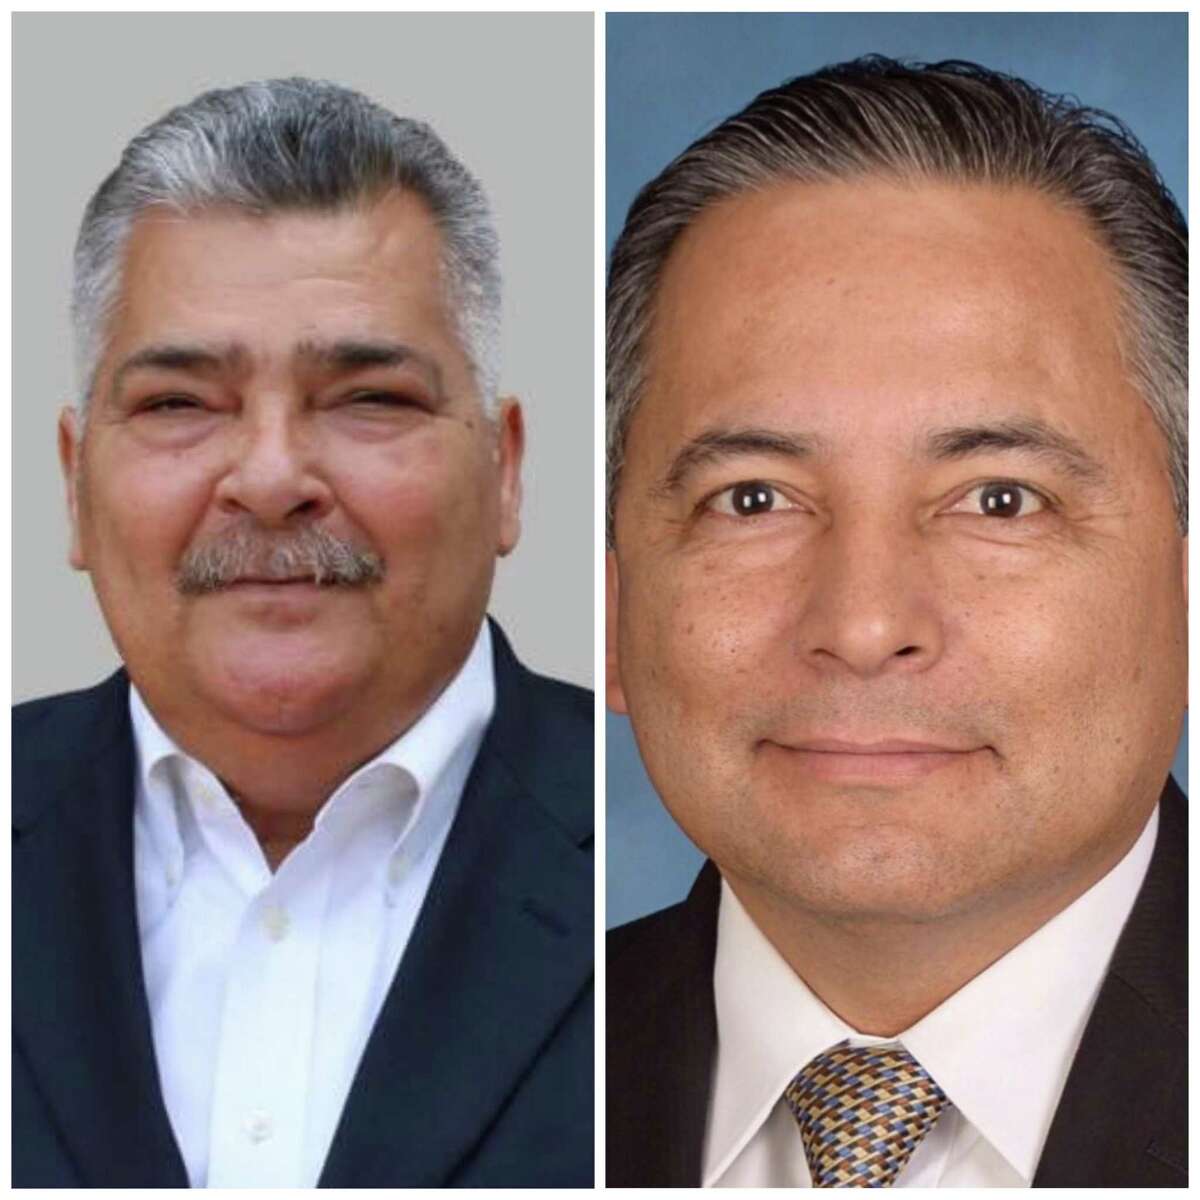 Manuel Lopez, left, lost to Ernesto Arrellano Jr. in a bid for the District 2 seat on the South San ISD board.